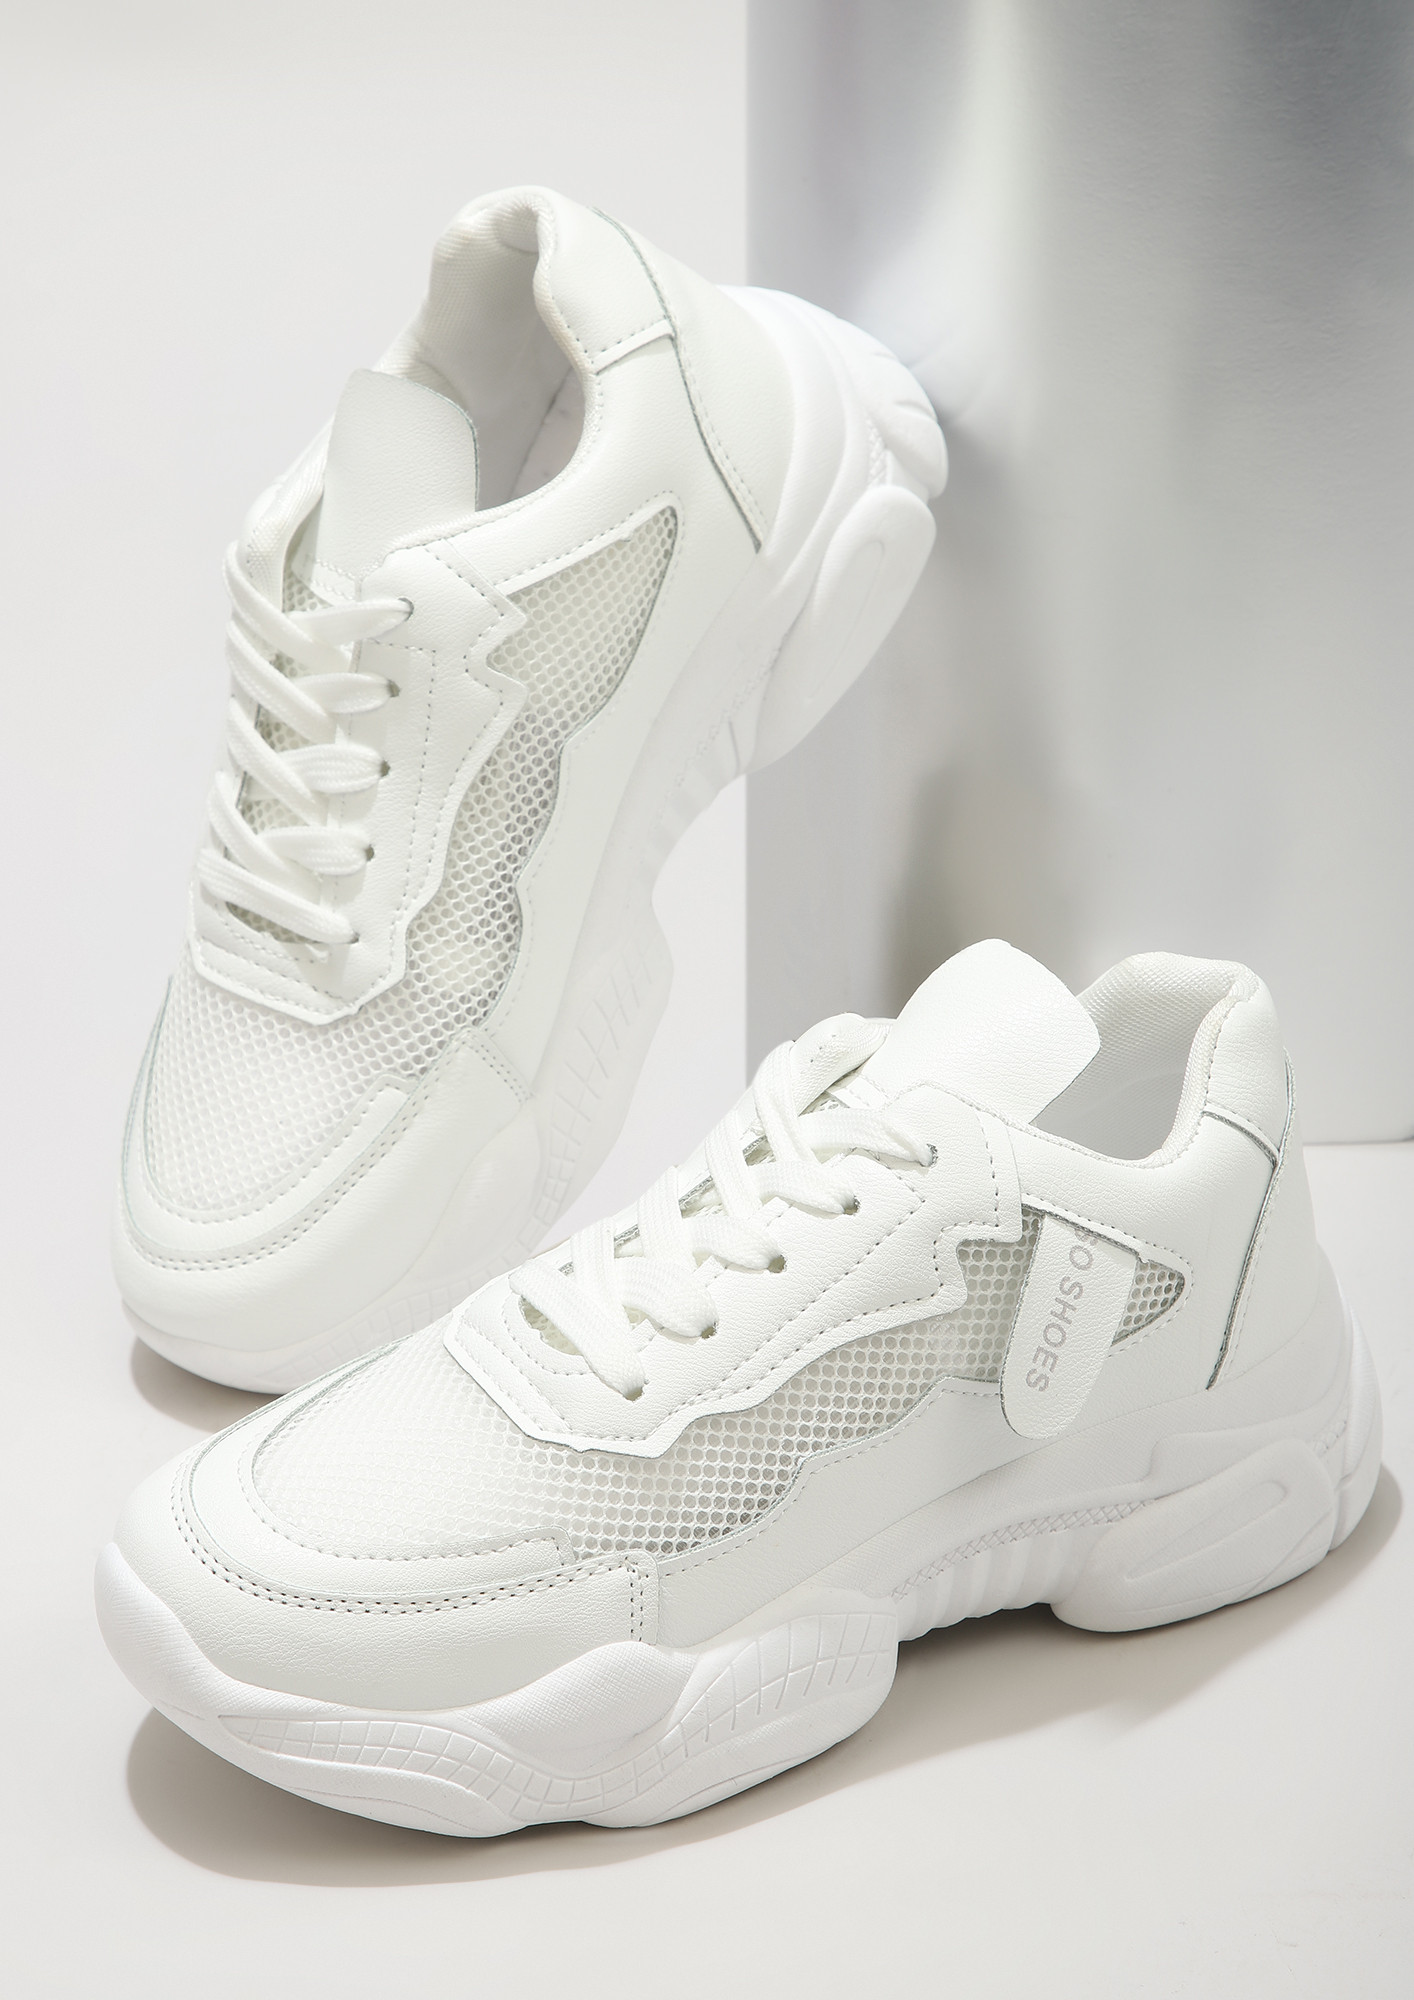 RUNNING ON THE HIGH-STREET WHITE TRAINERS